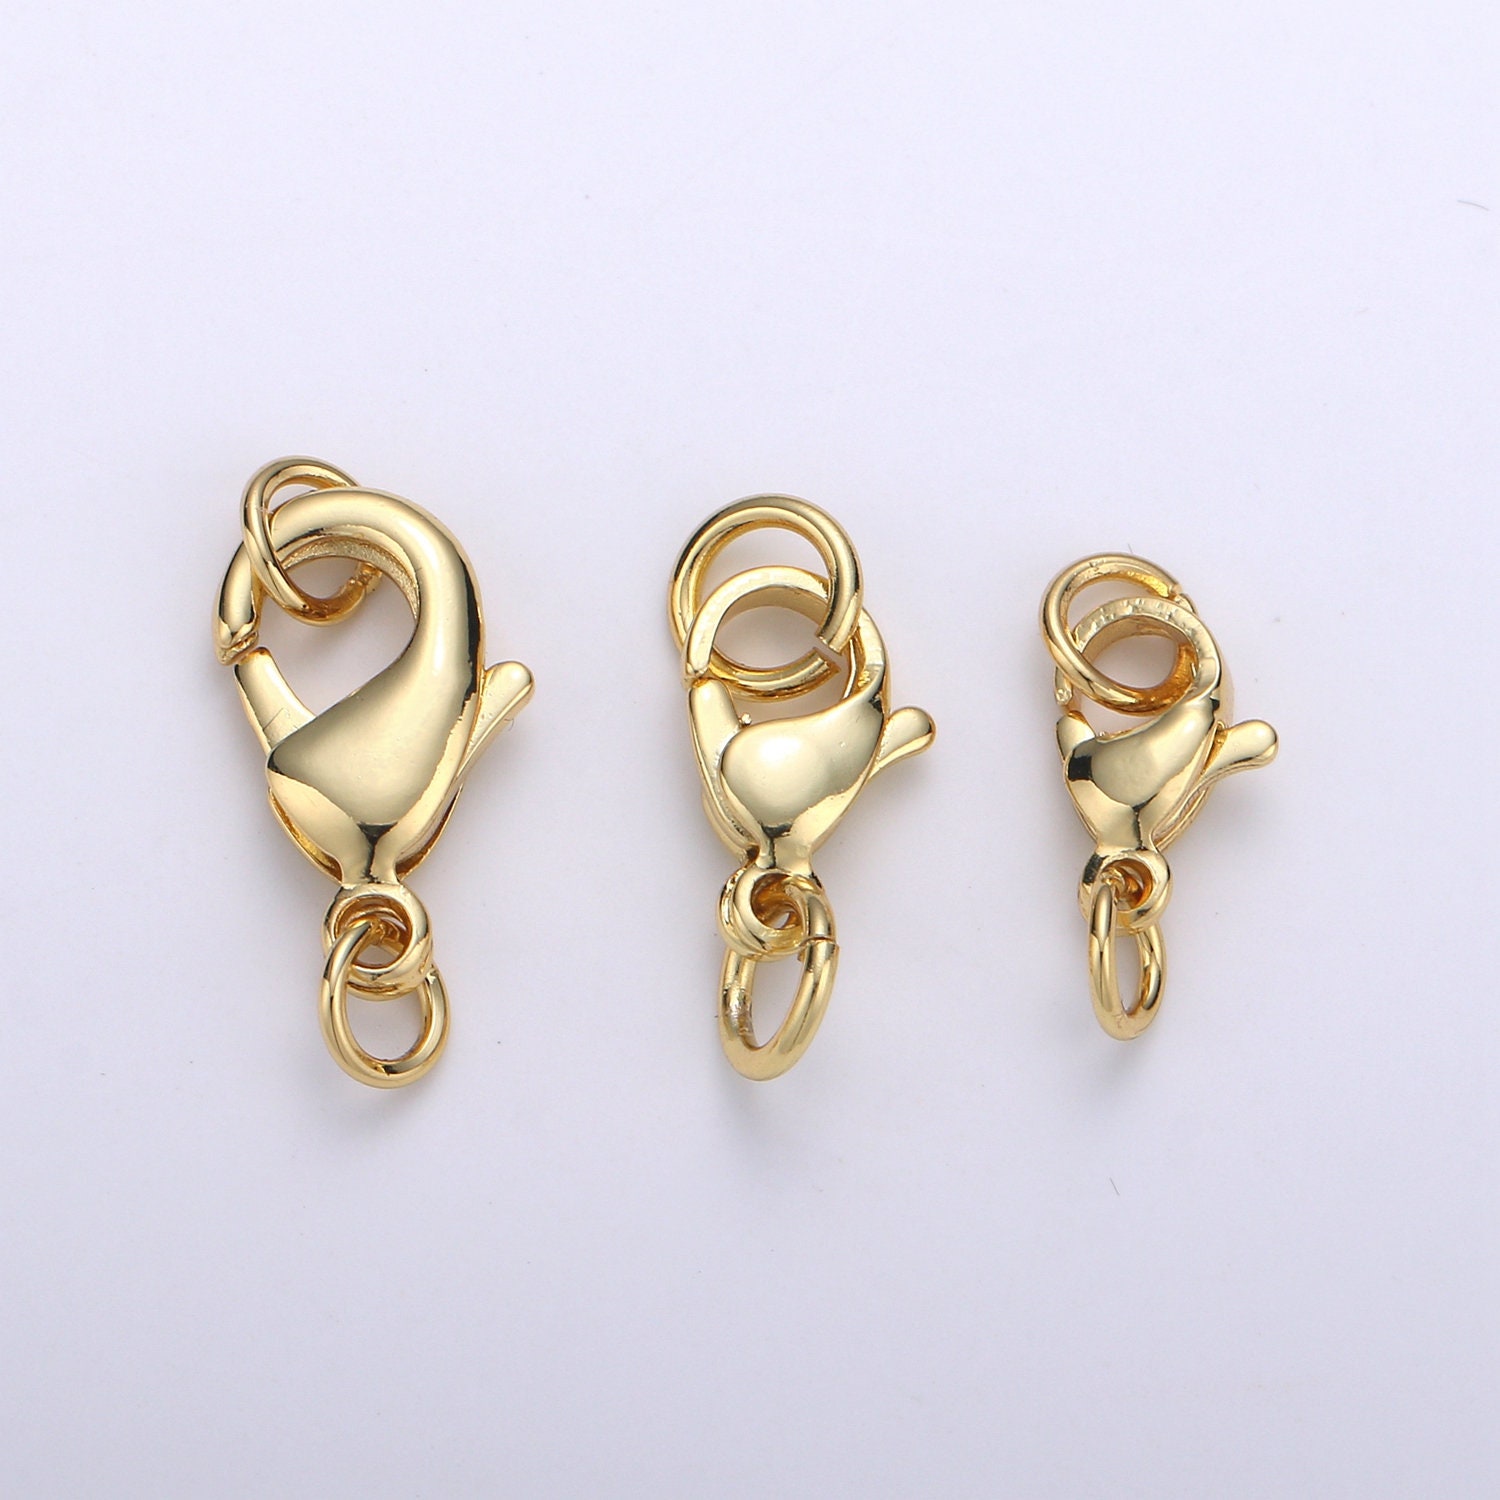 Bead Landing 15mm Gold Lobster Claw Clasp - 8 ct